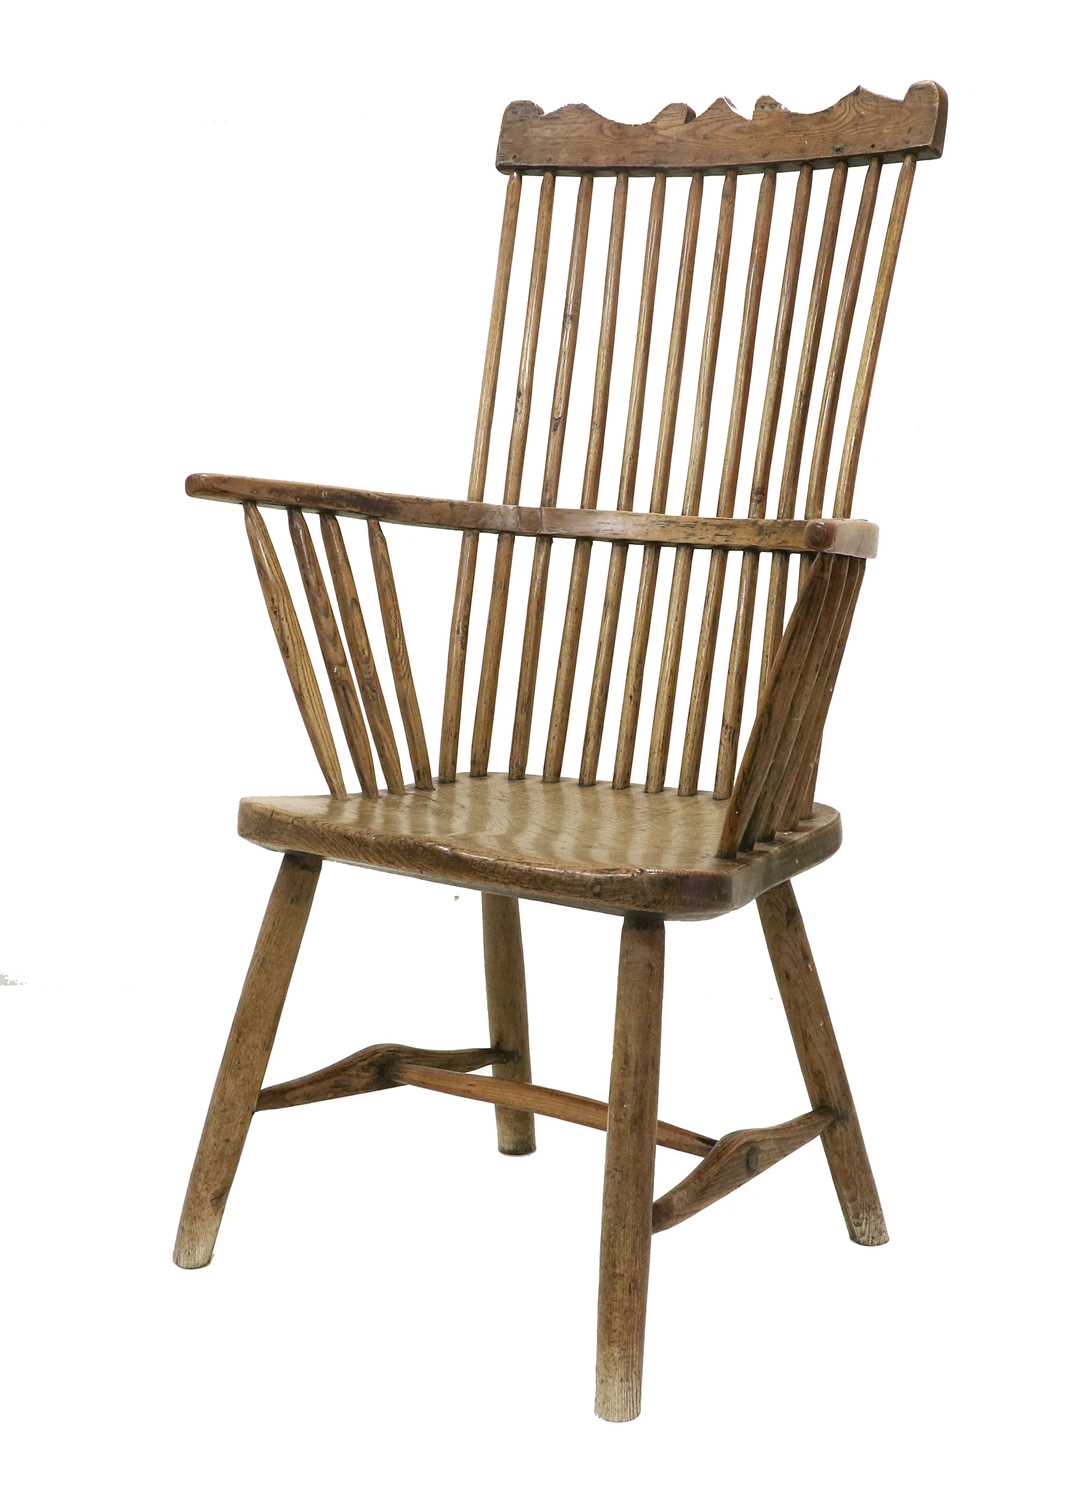 An Ash Comb-Back Windsor Armchair, late 18th/early 19th century, with traces of green paint, the